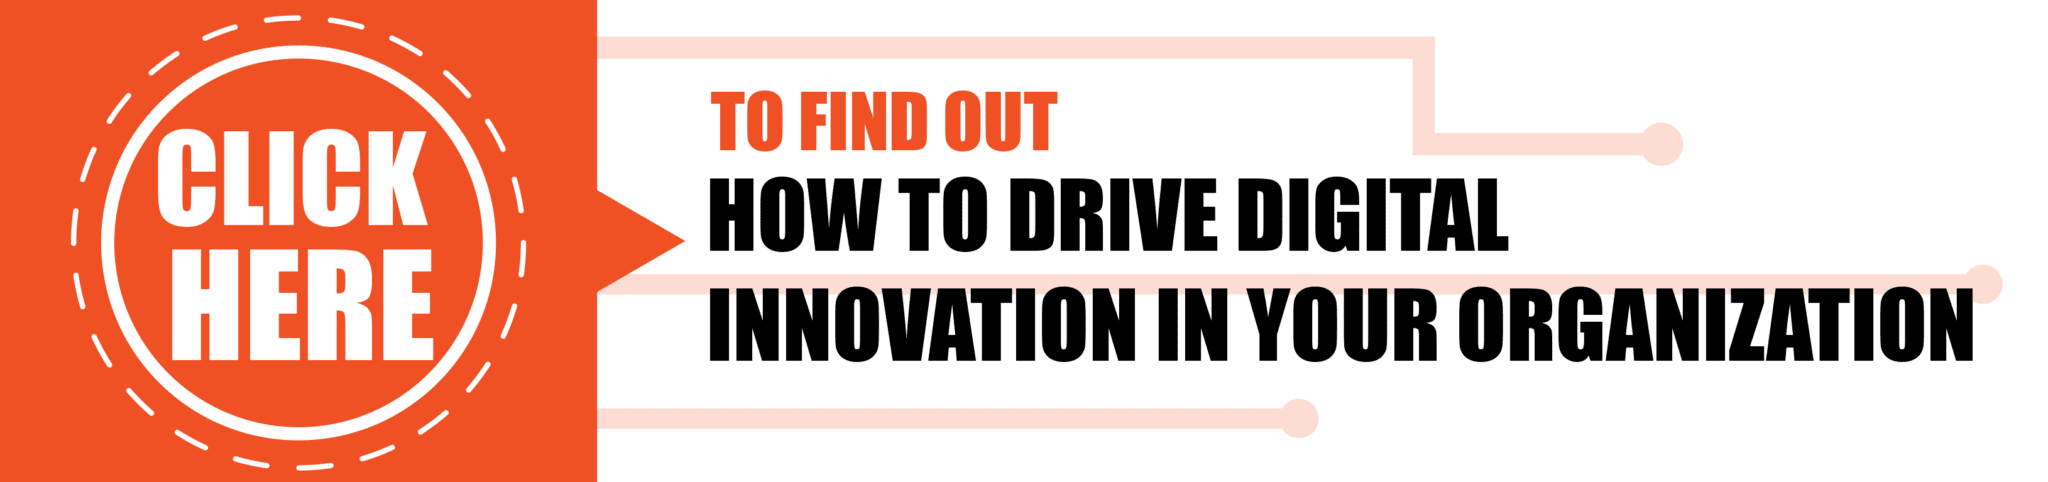 How to Drive Digital Innovation in Your Organization